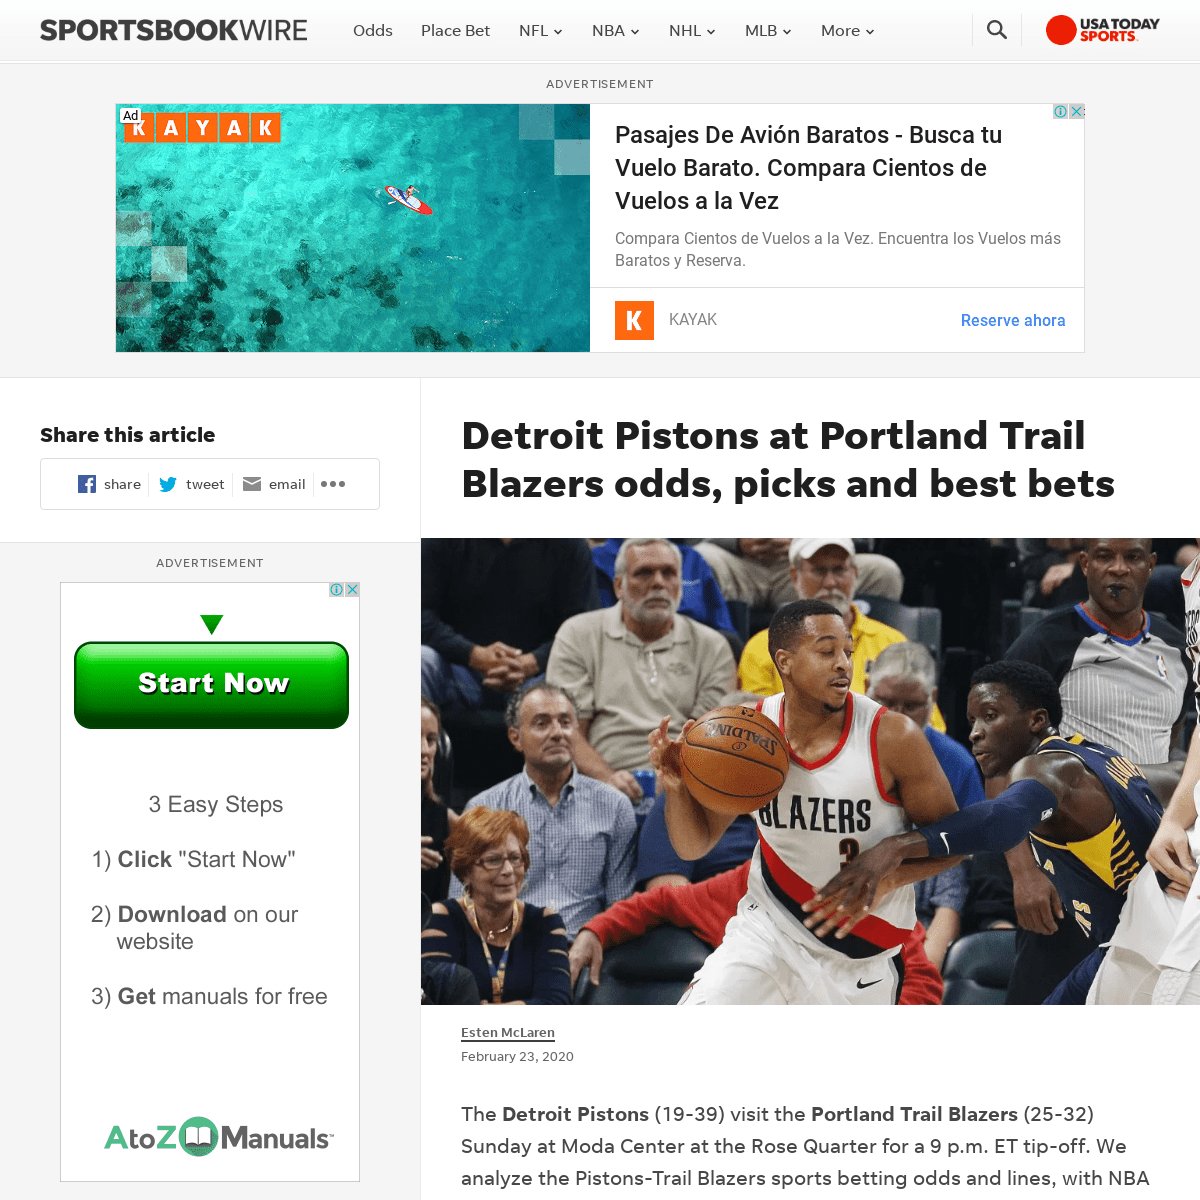 A complete backup of sportsbookwire.usatoday.com/2020/02/23/detroit-pistons-at-portland-trail-blazers-odds-picks-and-best-bets/